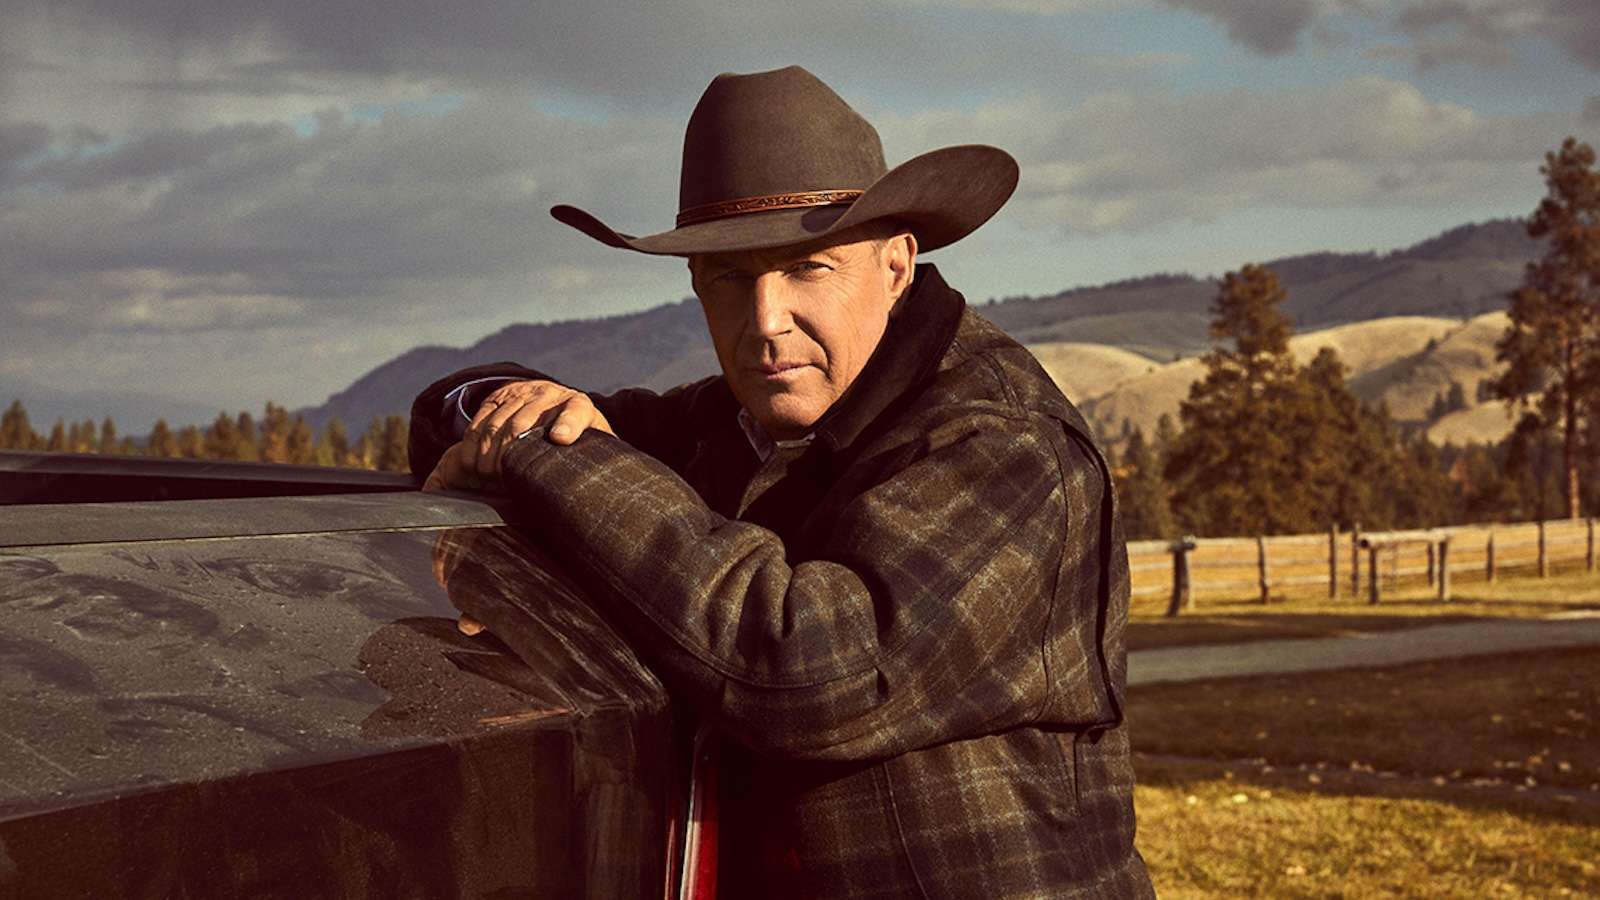 Kevin Costner as John Dutton in Yellowstone poster